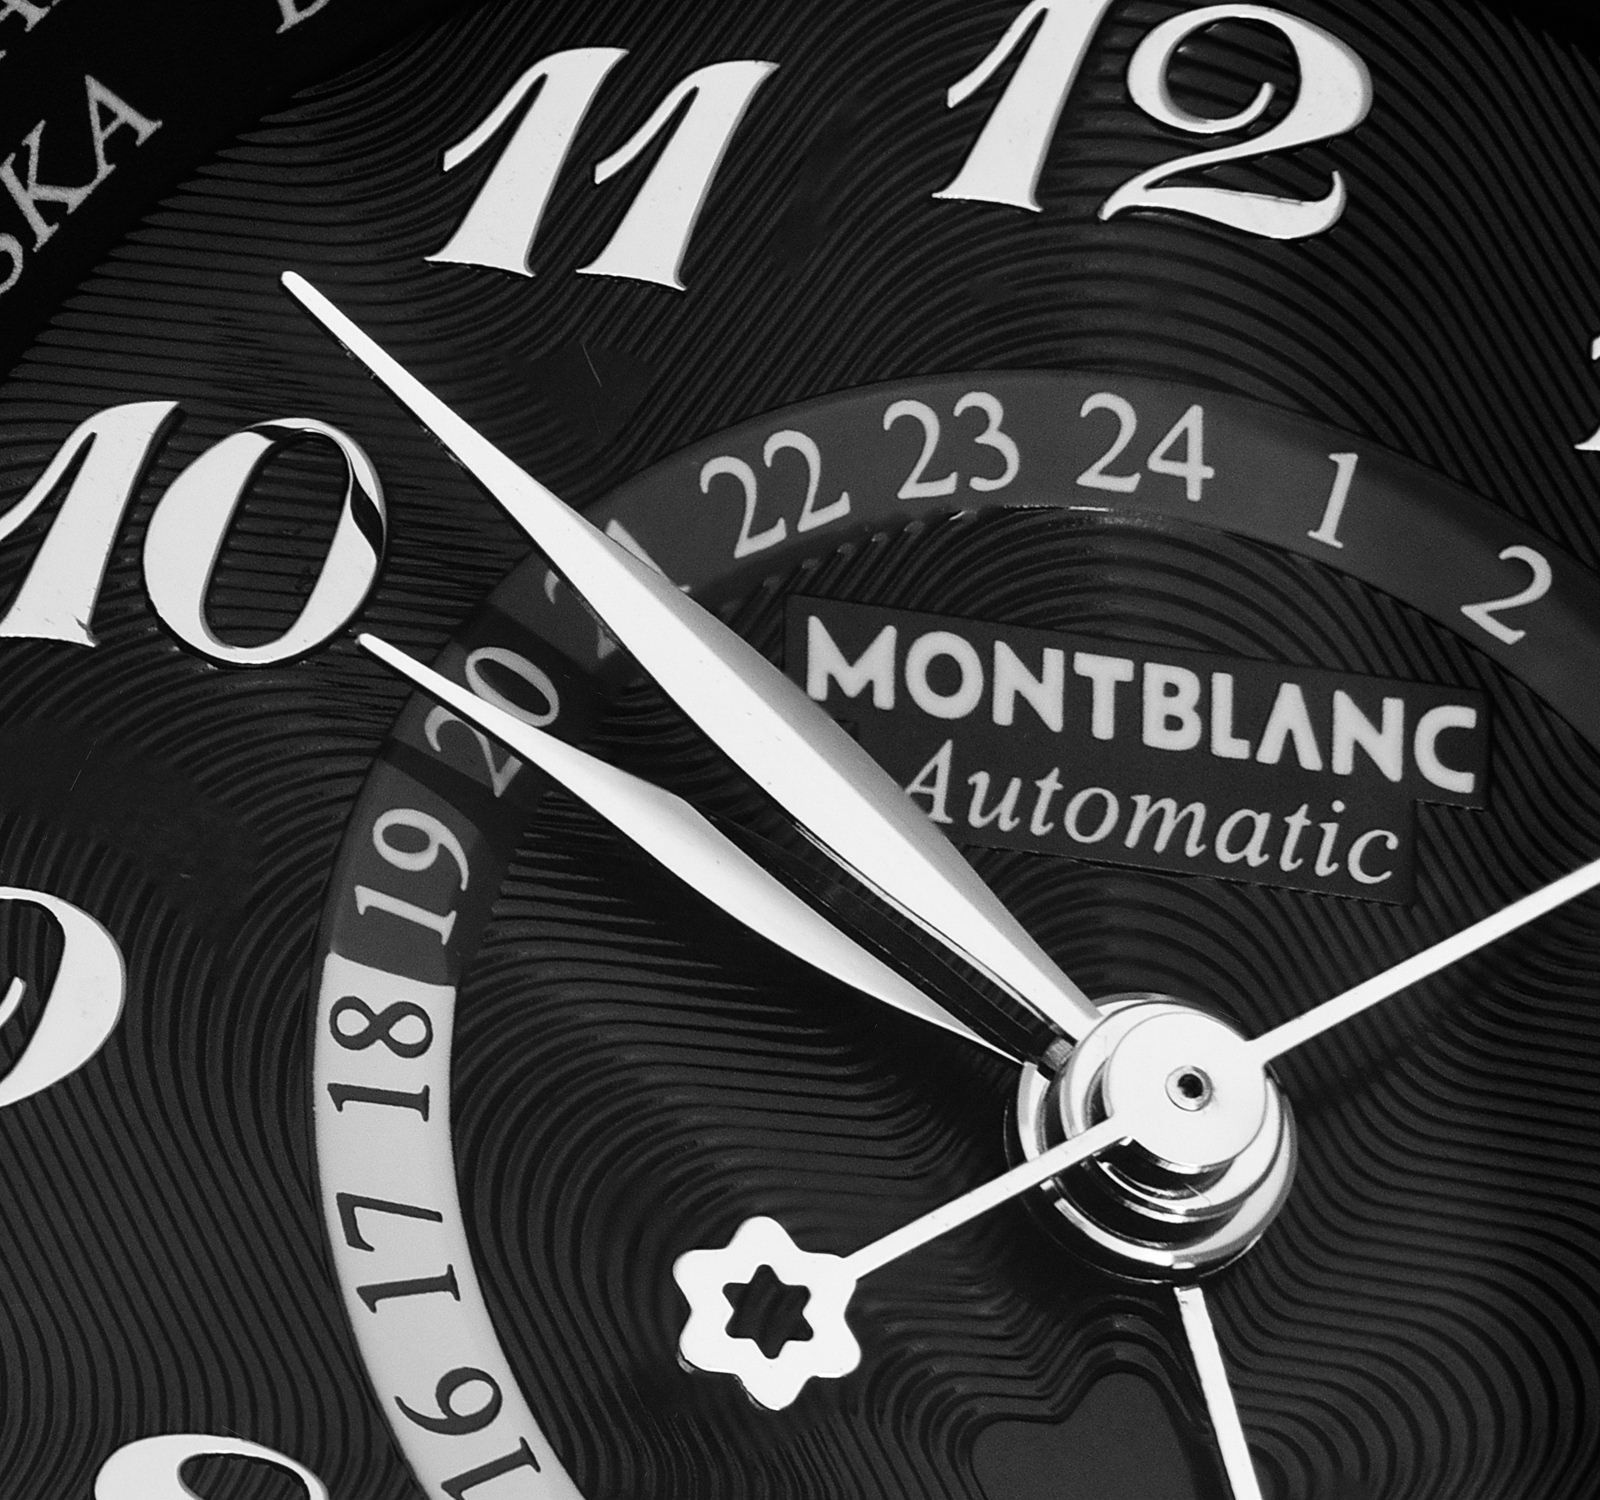 Pre-Owned Montblanc Star Price